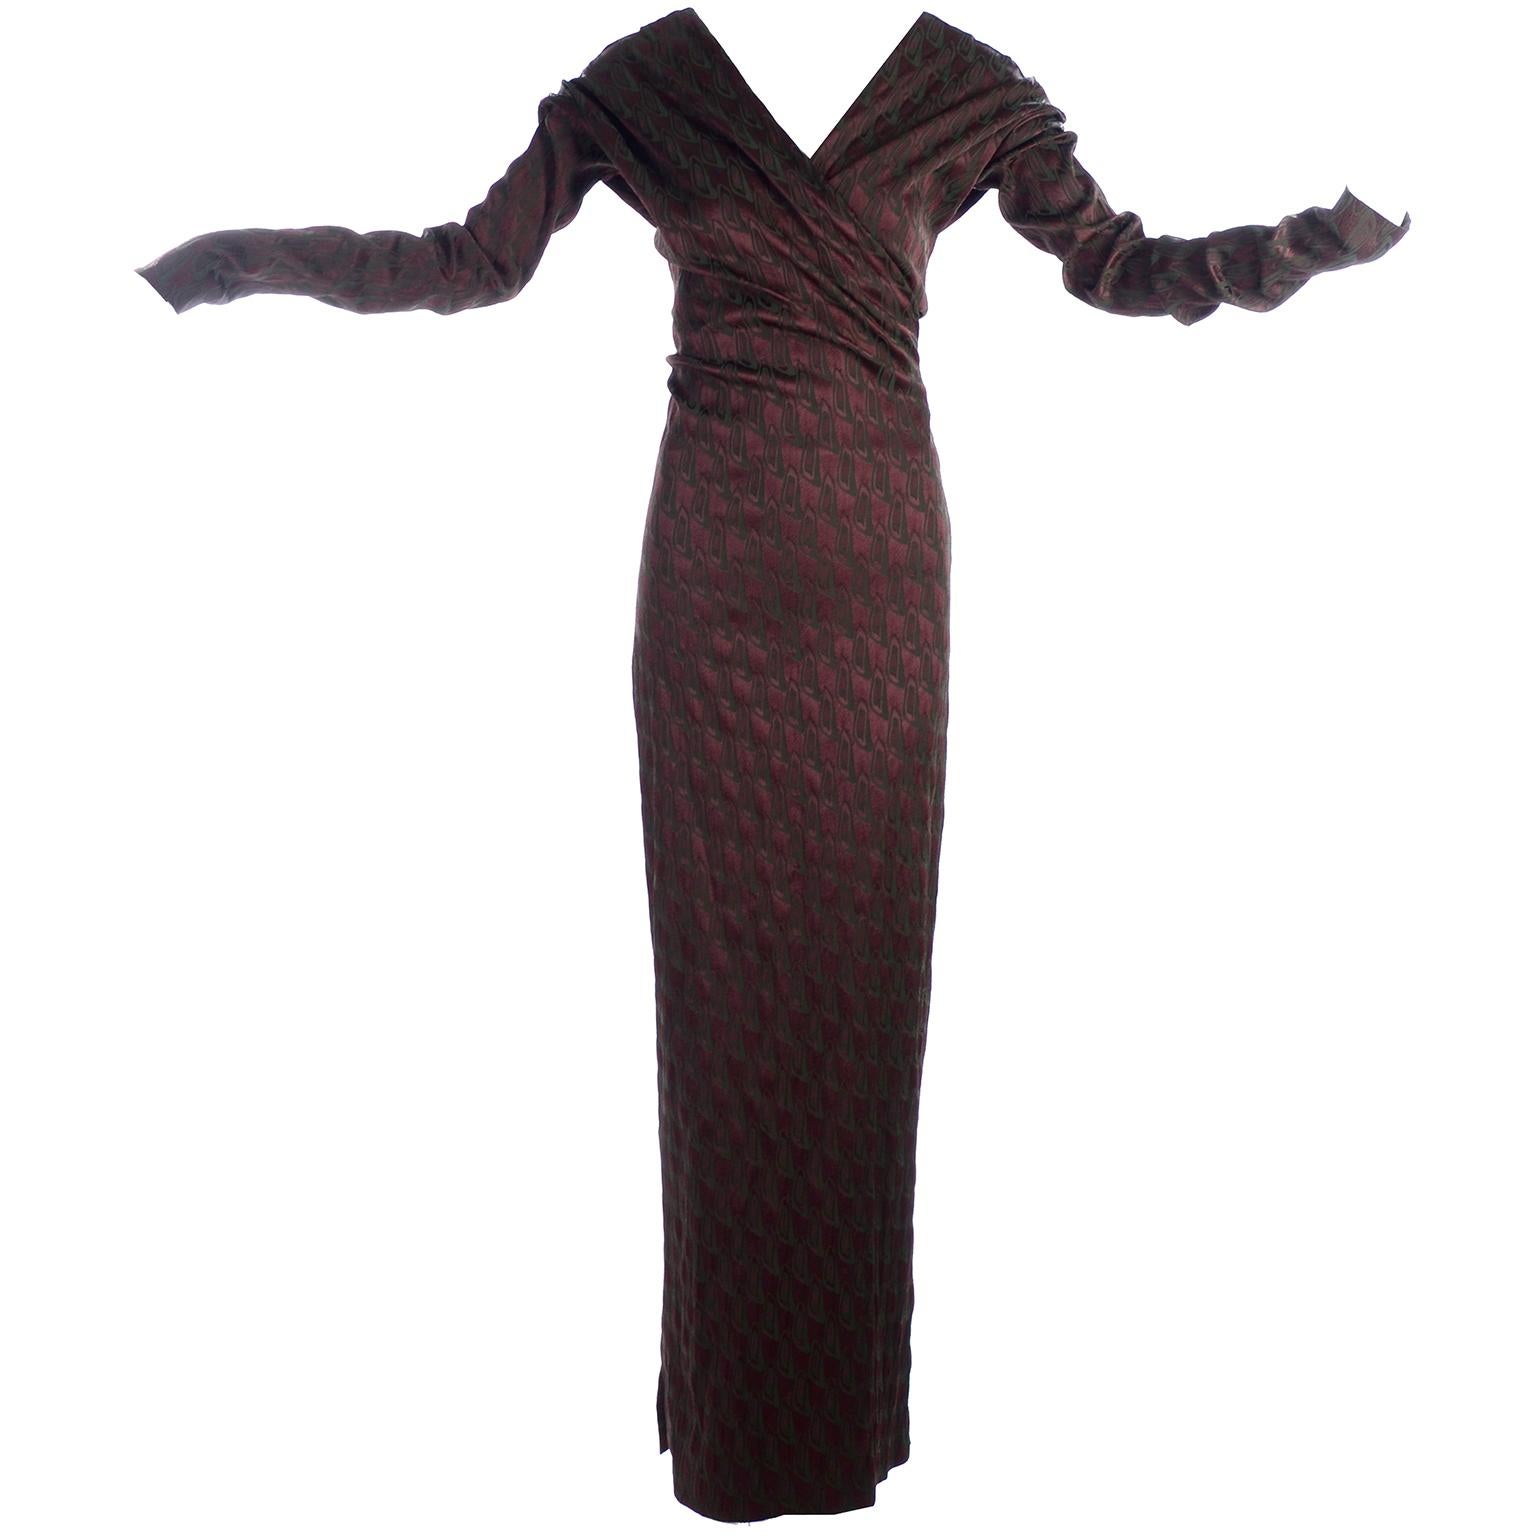 This is a stunning Jean Paul Gaultier full length dress with his iconic long exaggerated sleeves.  The dress has a crossover bodice  and is in a rayon blend deep burgundy and dark green abstract print.  The dress was purchased in the early 2000's